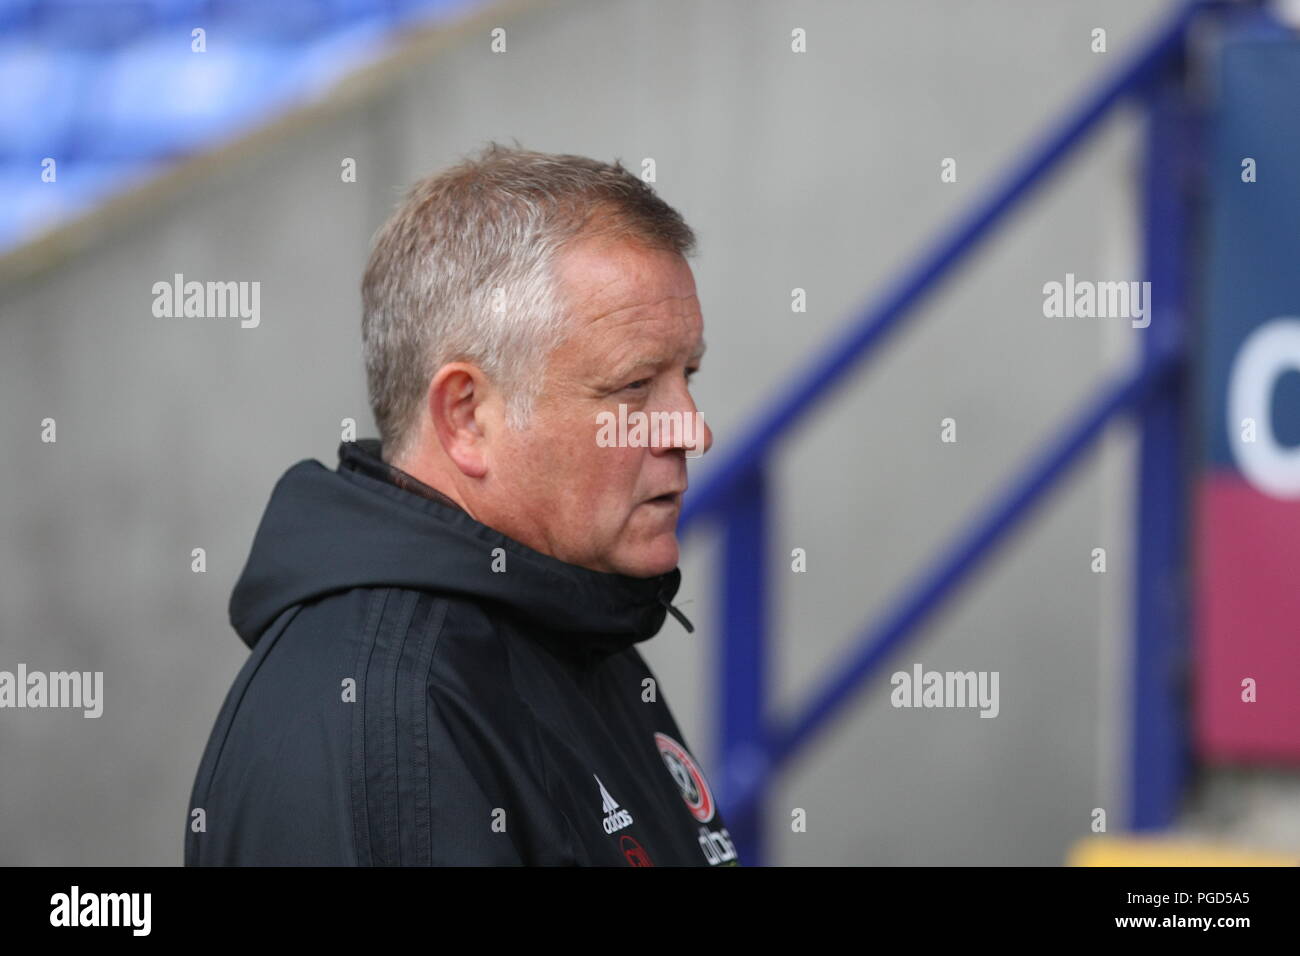 Bolton, Lancashire, UK. 25th August, 2018. Sheffield United Manager Chris Wilder in the dugout ahead of the EFL Championship game Bolton Wanderers v Sheffield United. Credit: Simon Newbury/Alamy Live News Stock Photo